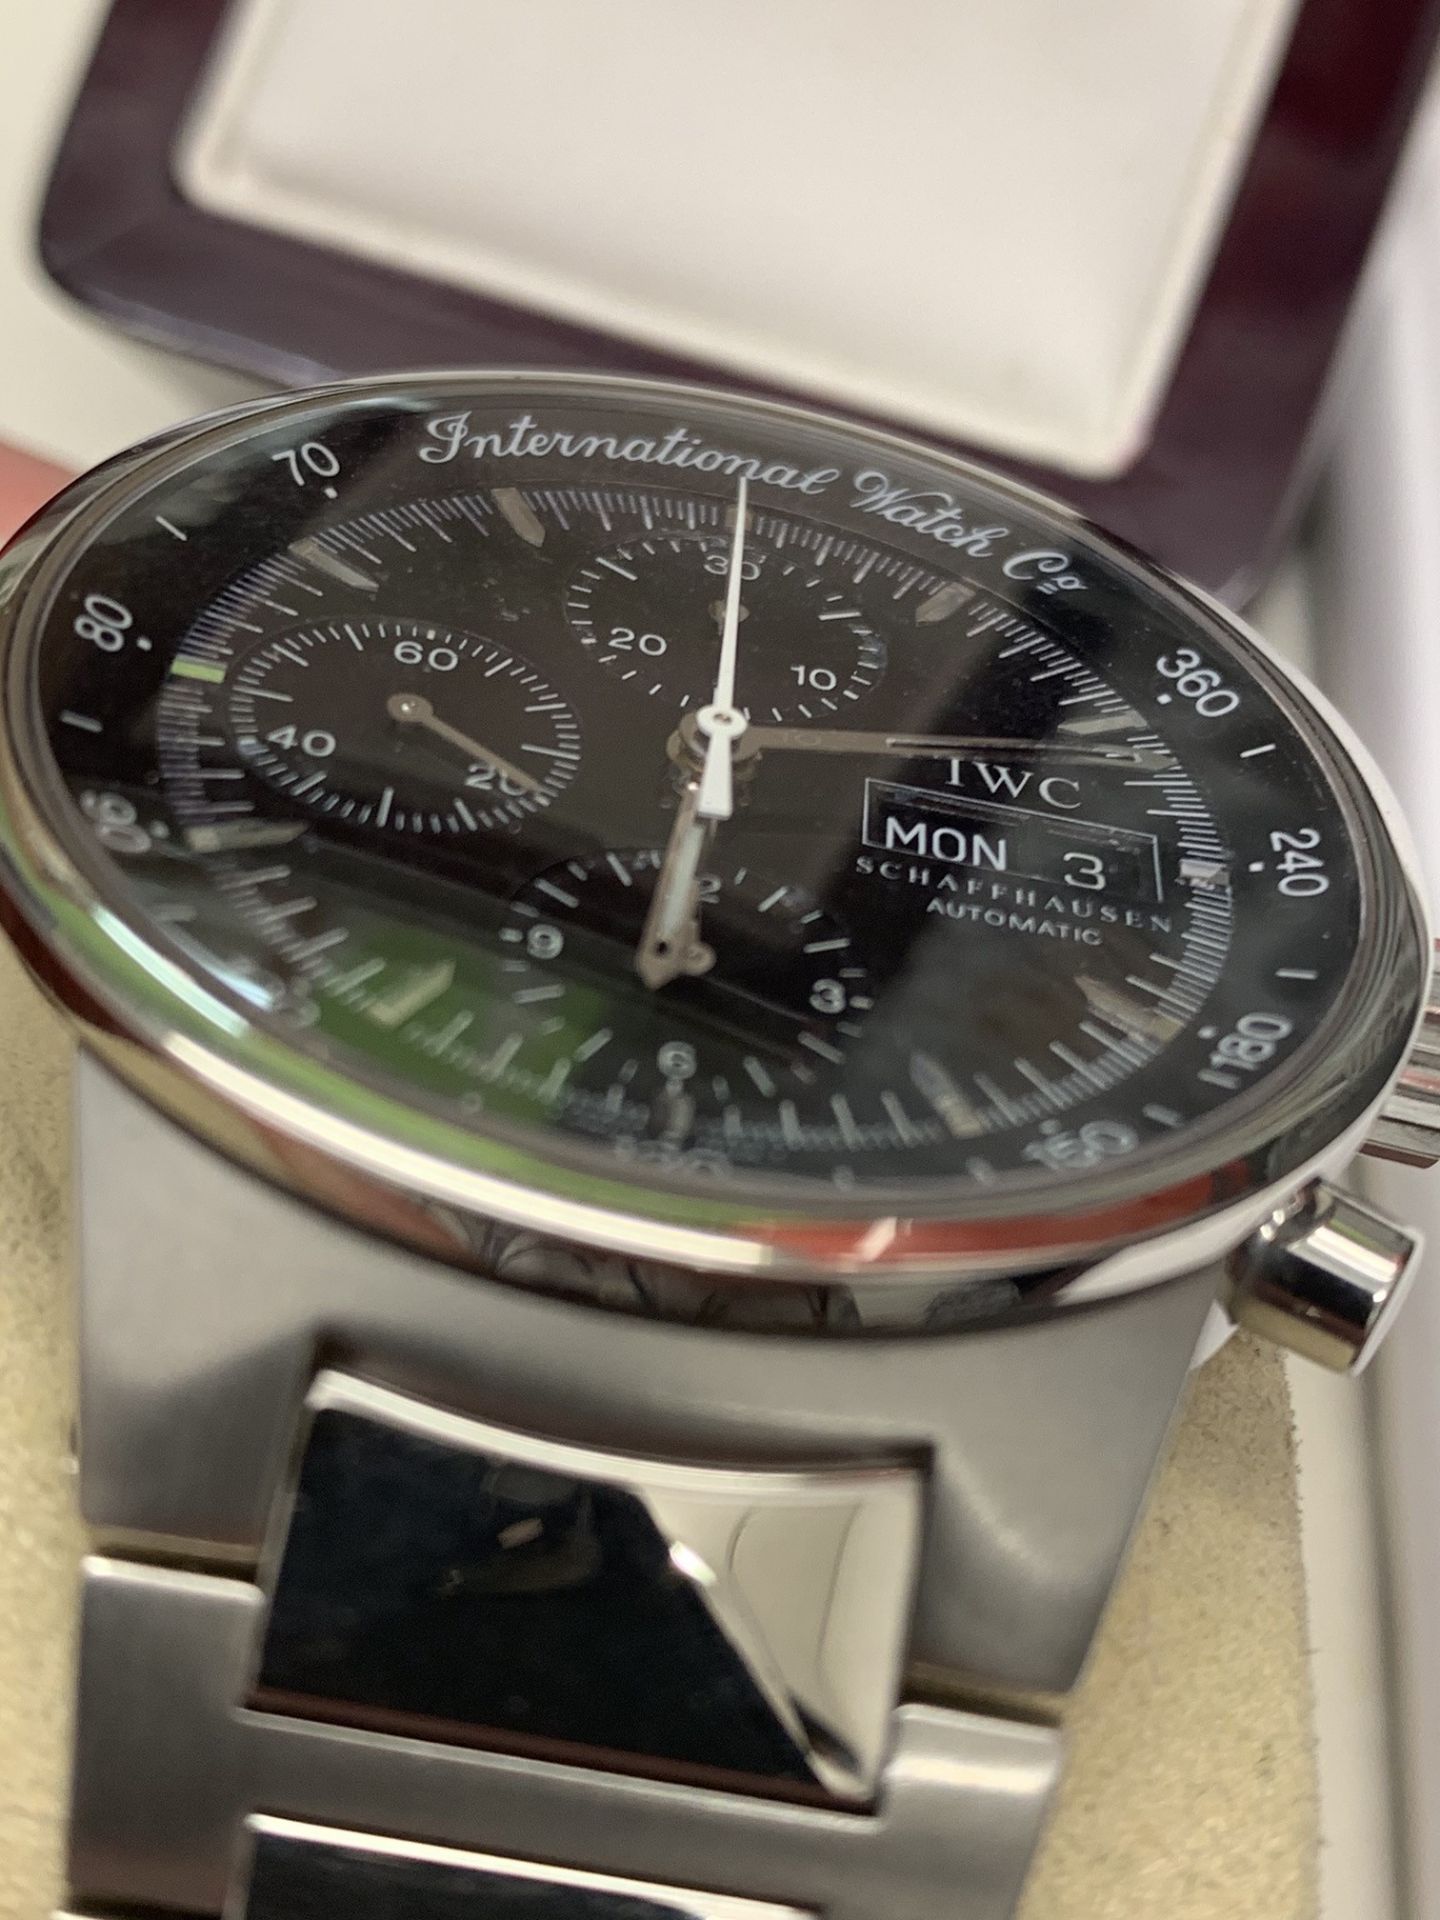 IWC CHRONOGRAPH S/STEEL WATCH 39.5mm AUTOMATIC - Image 4 of 6